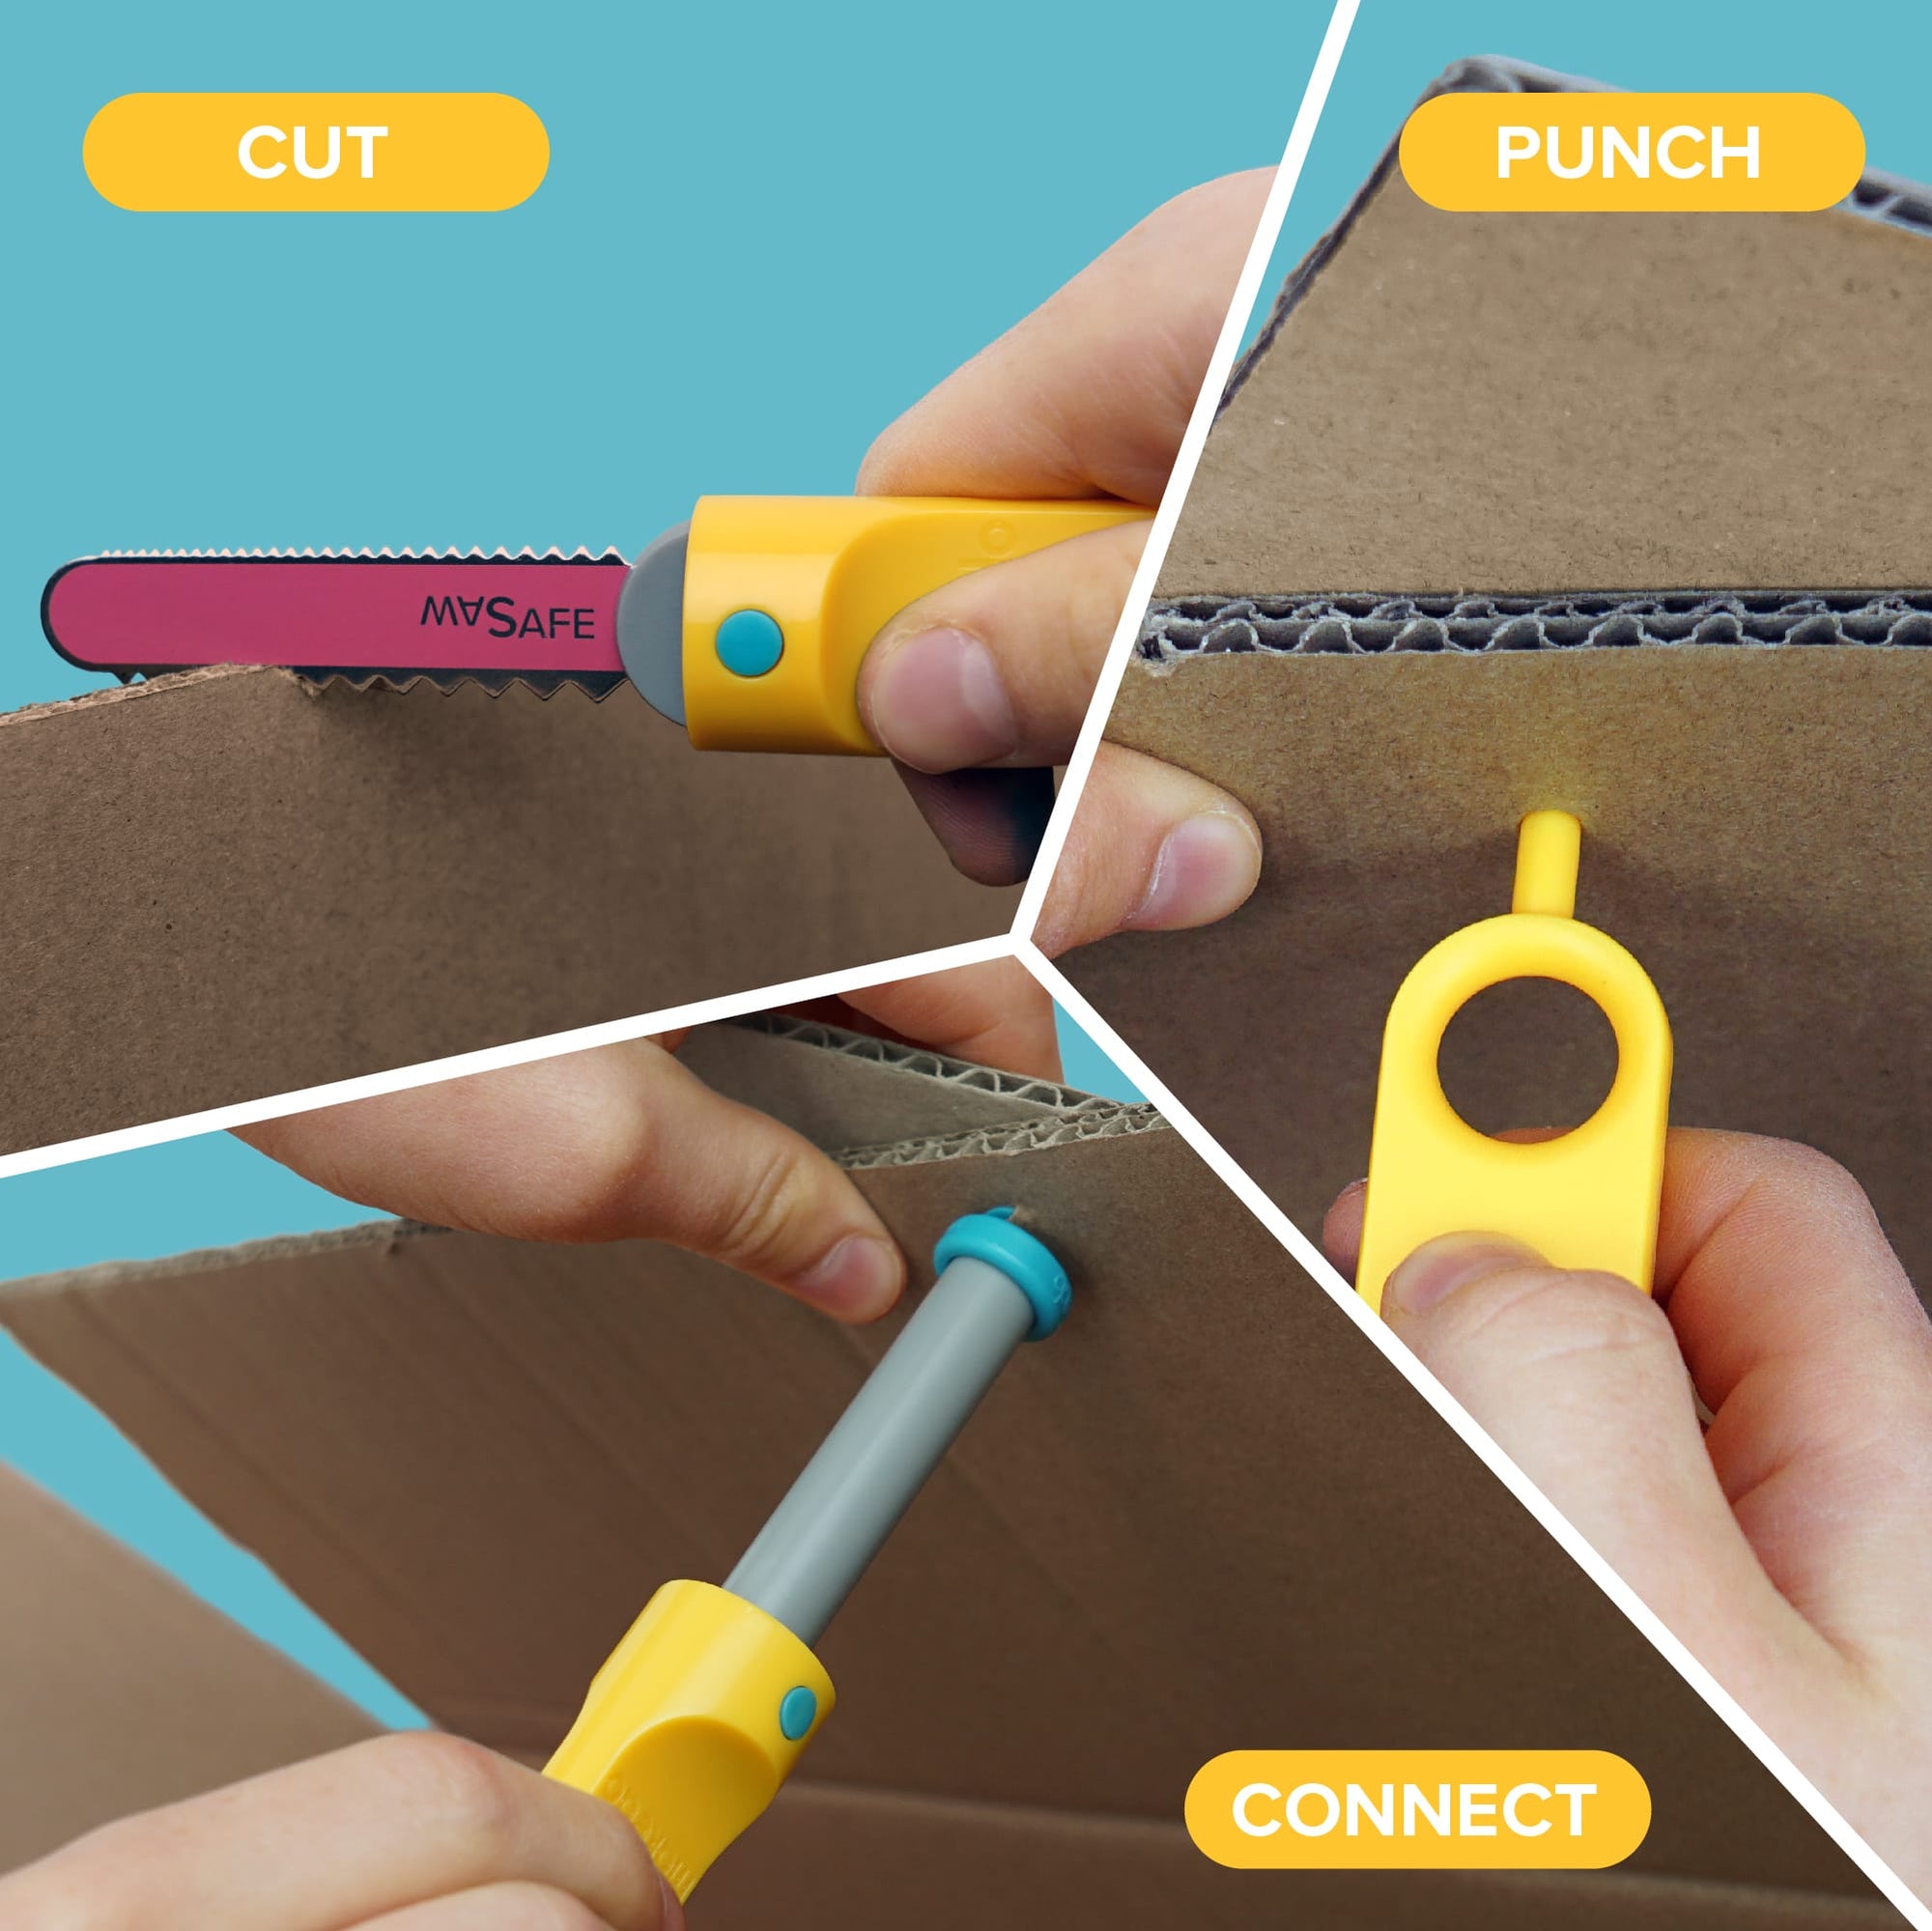 EXPLORE - Makedo Cardboard Construction Tools – In Stitches AK